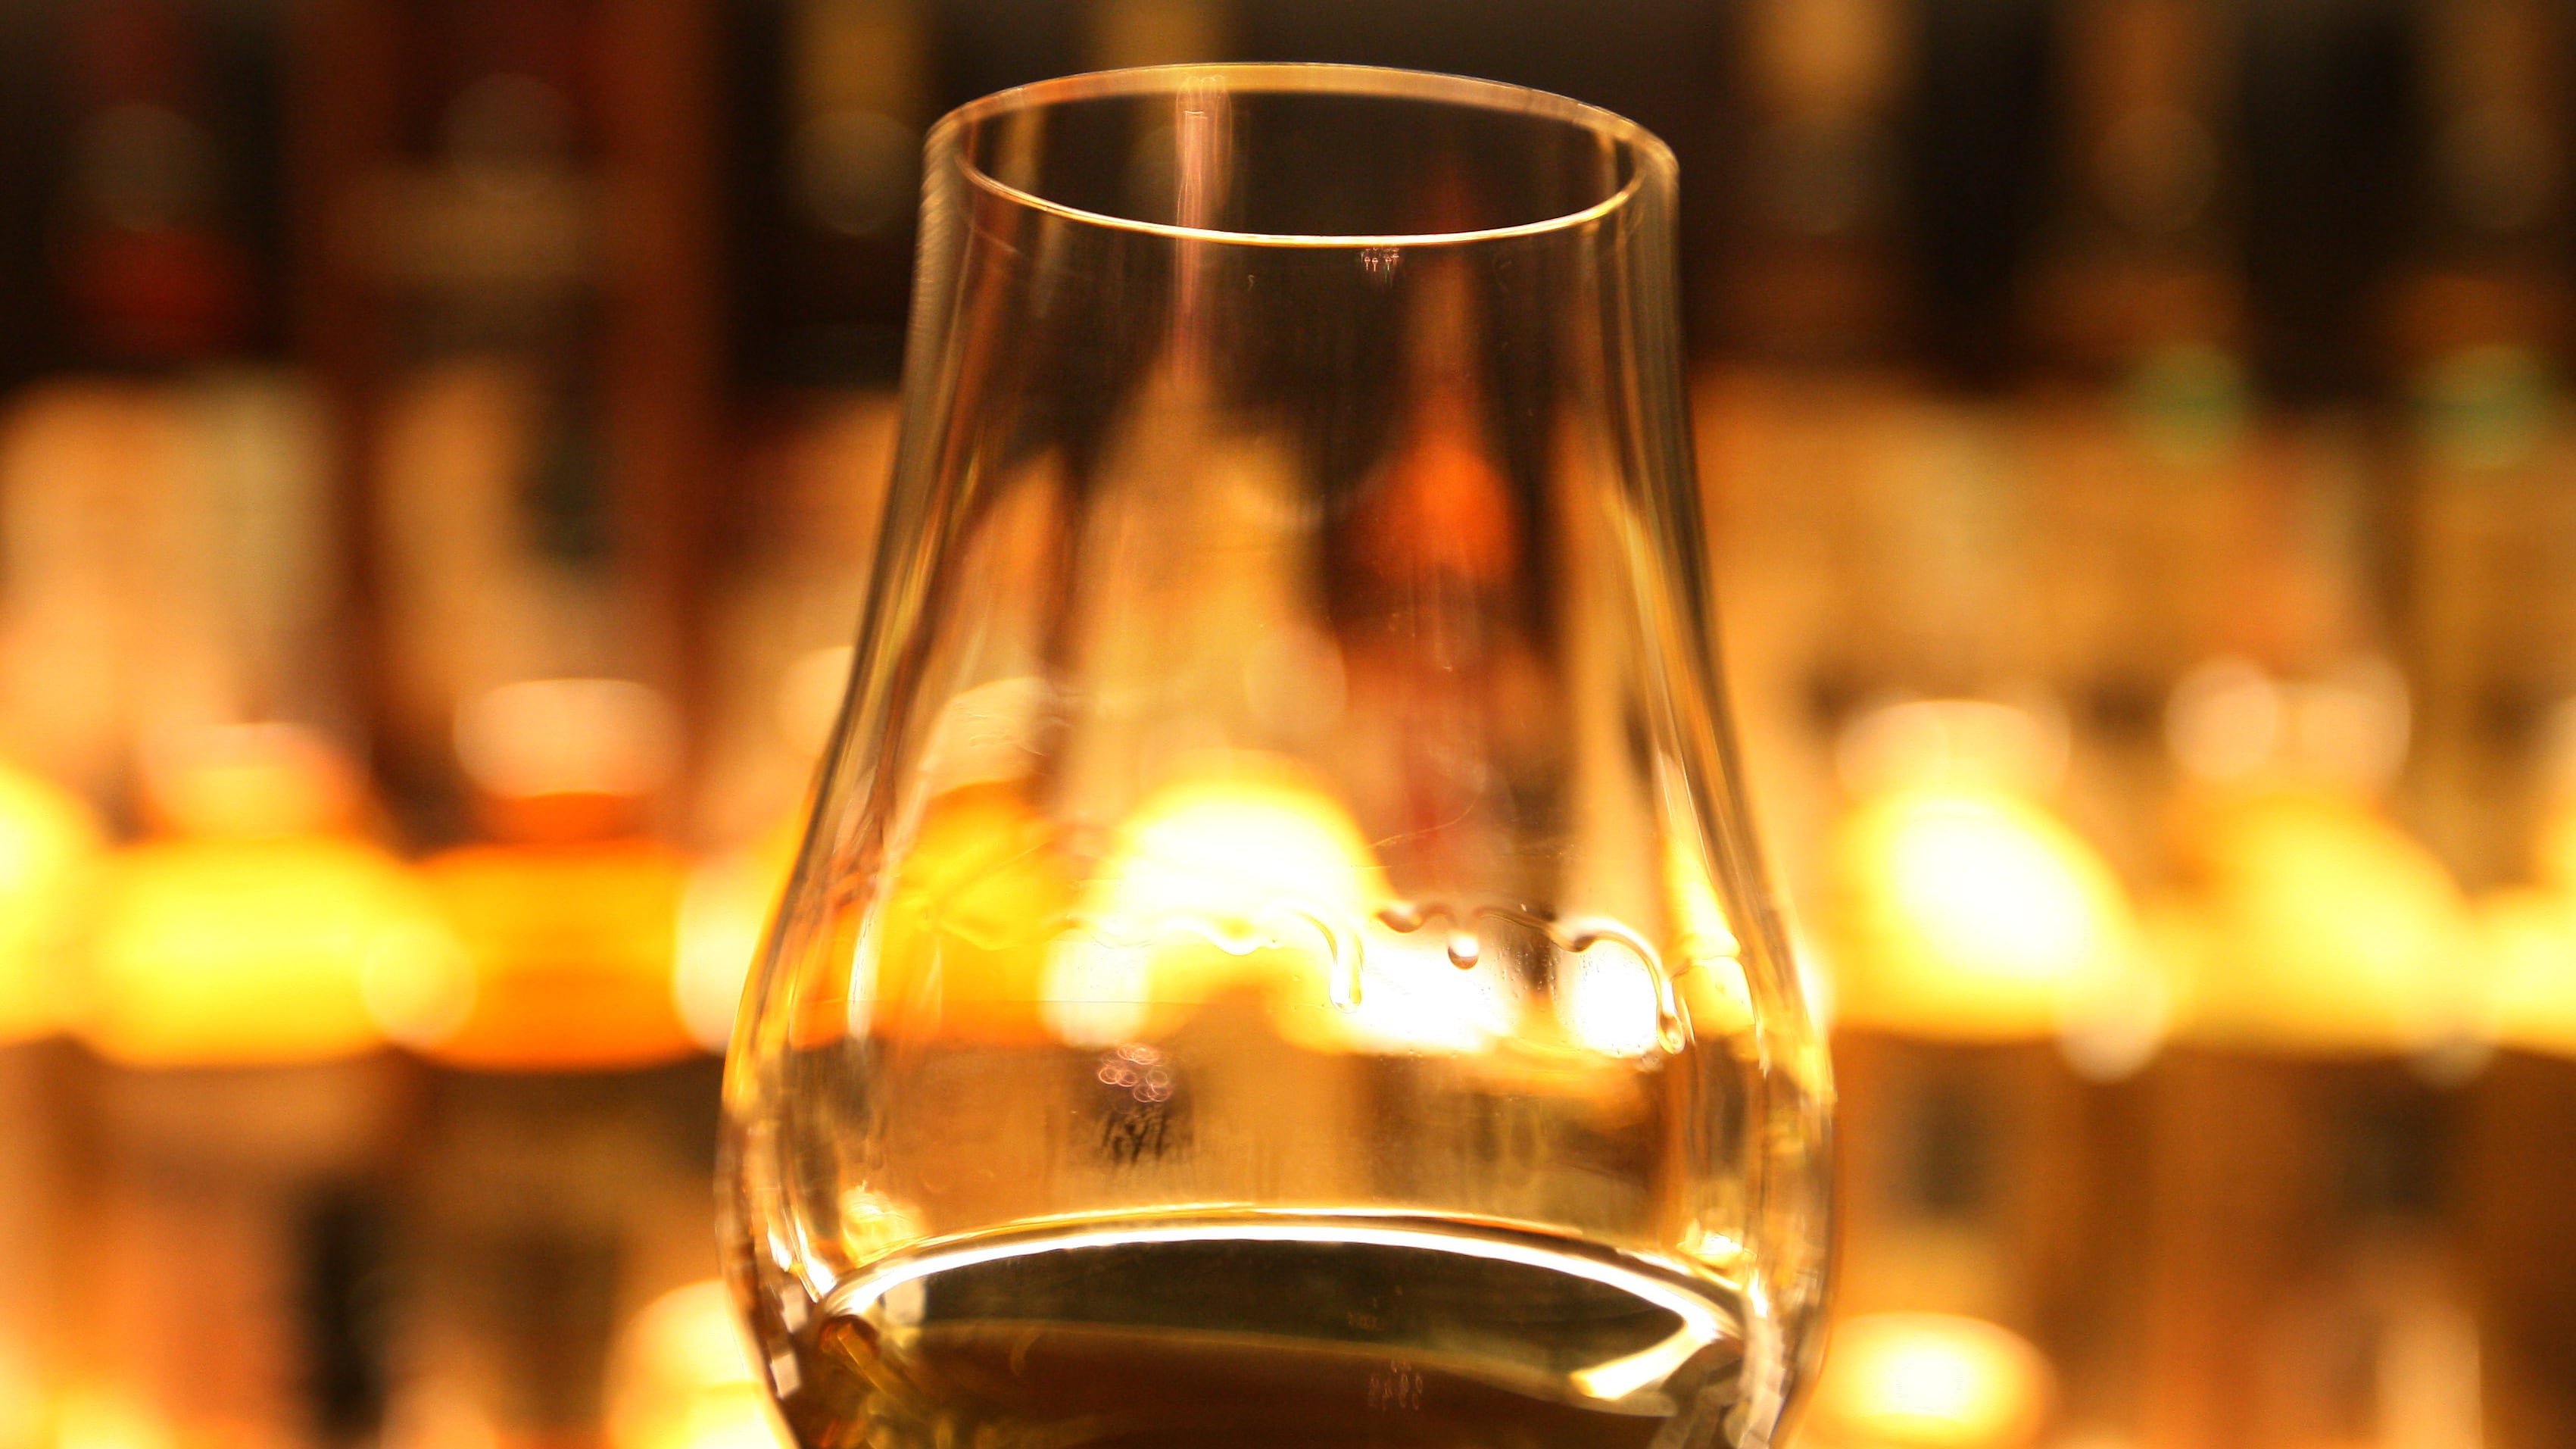 The GMB said industrial action now could affect whisky supplies over Christmas